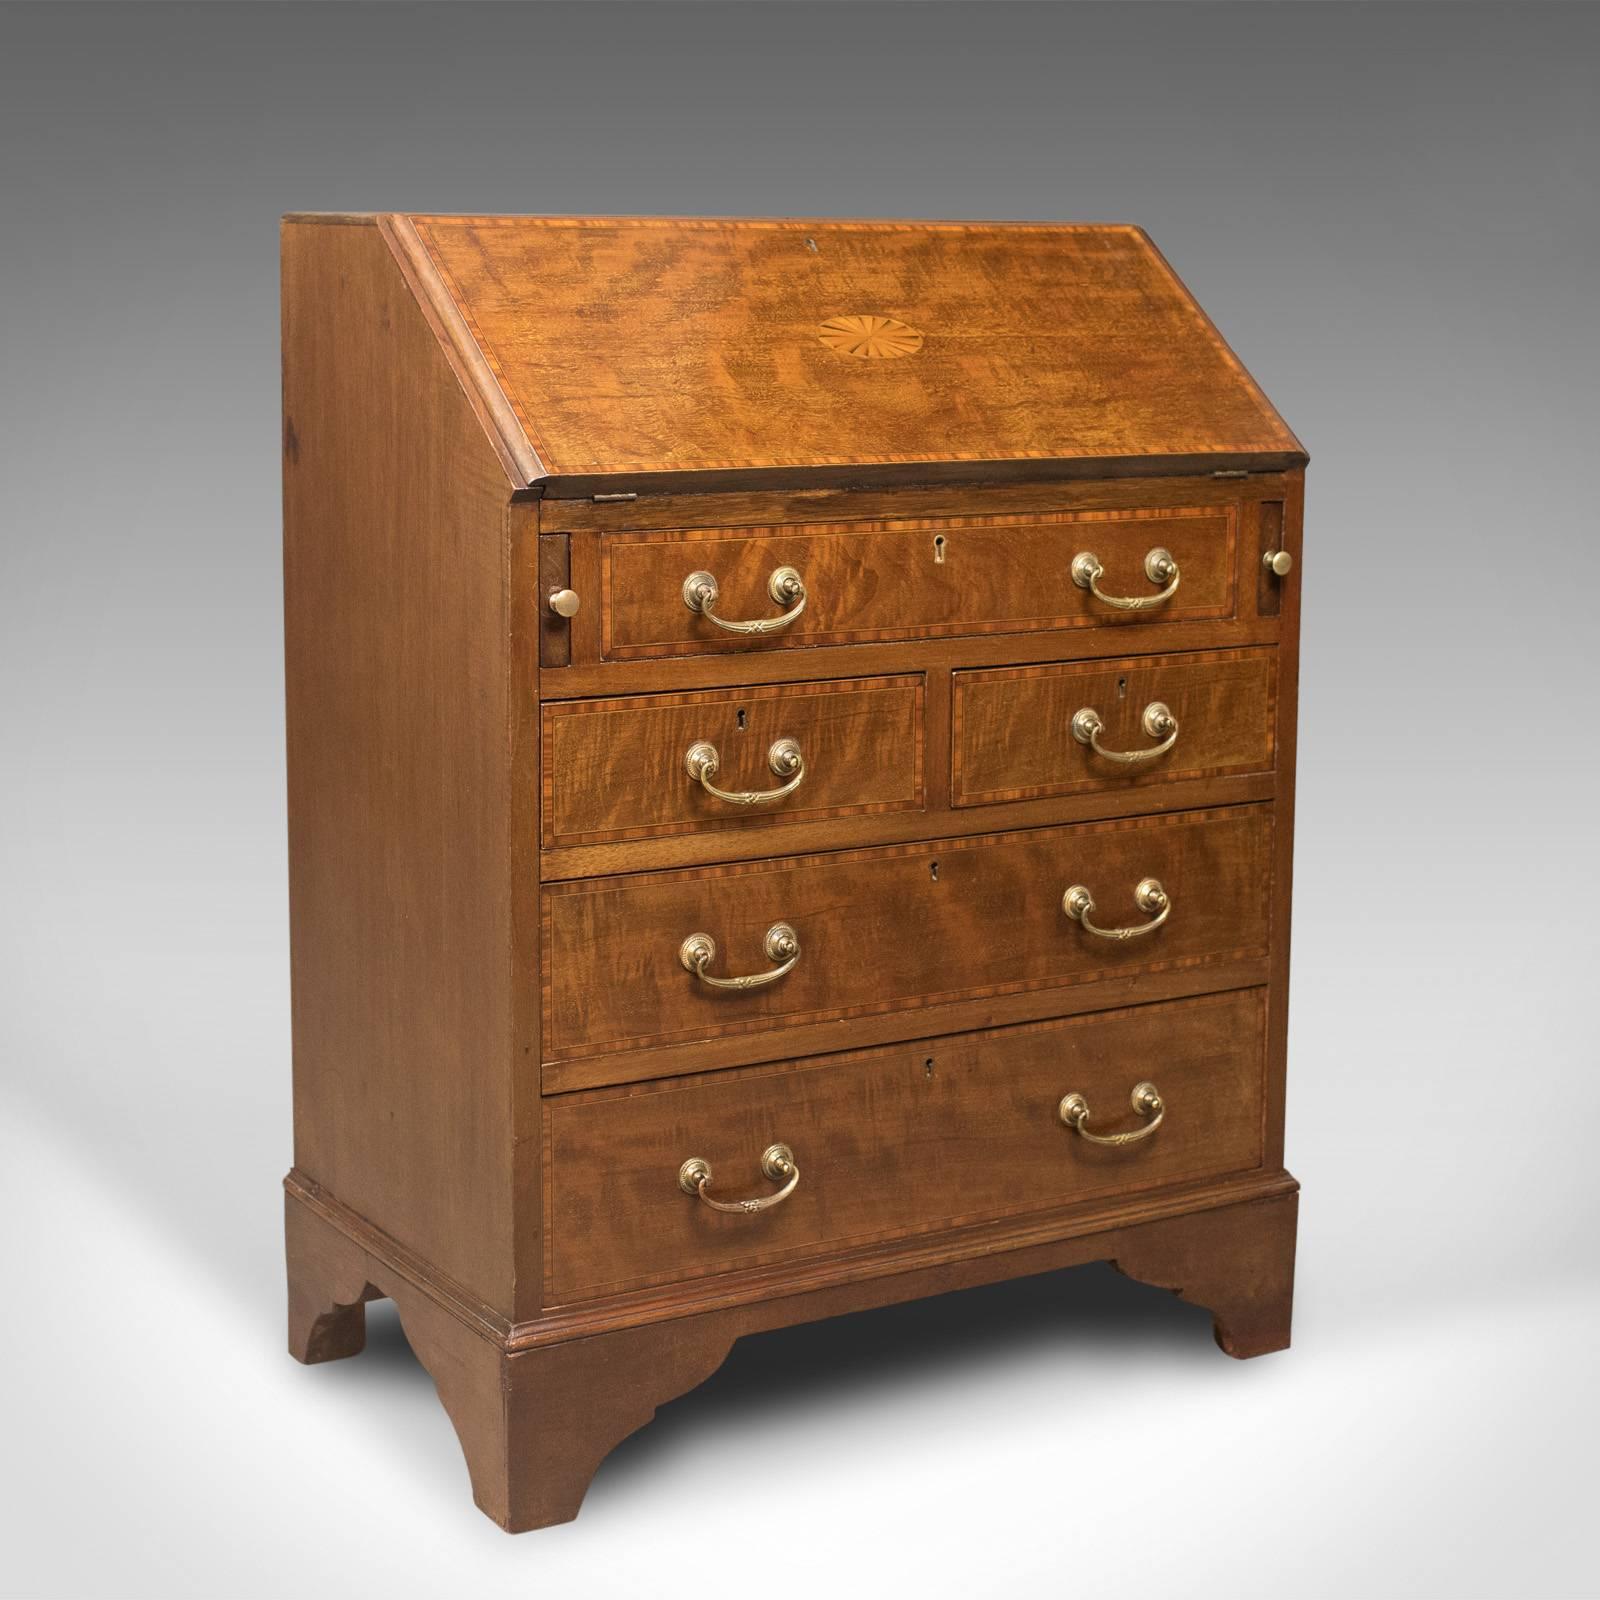 This is an Edwardian antique bureau in mahogany and oak. An English desk featuring a secret compartment, dating to circa 1910.

Quality craftsmanship in polished light mahogany and oak
Attractive honey tones highlighted with crossbanding and an